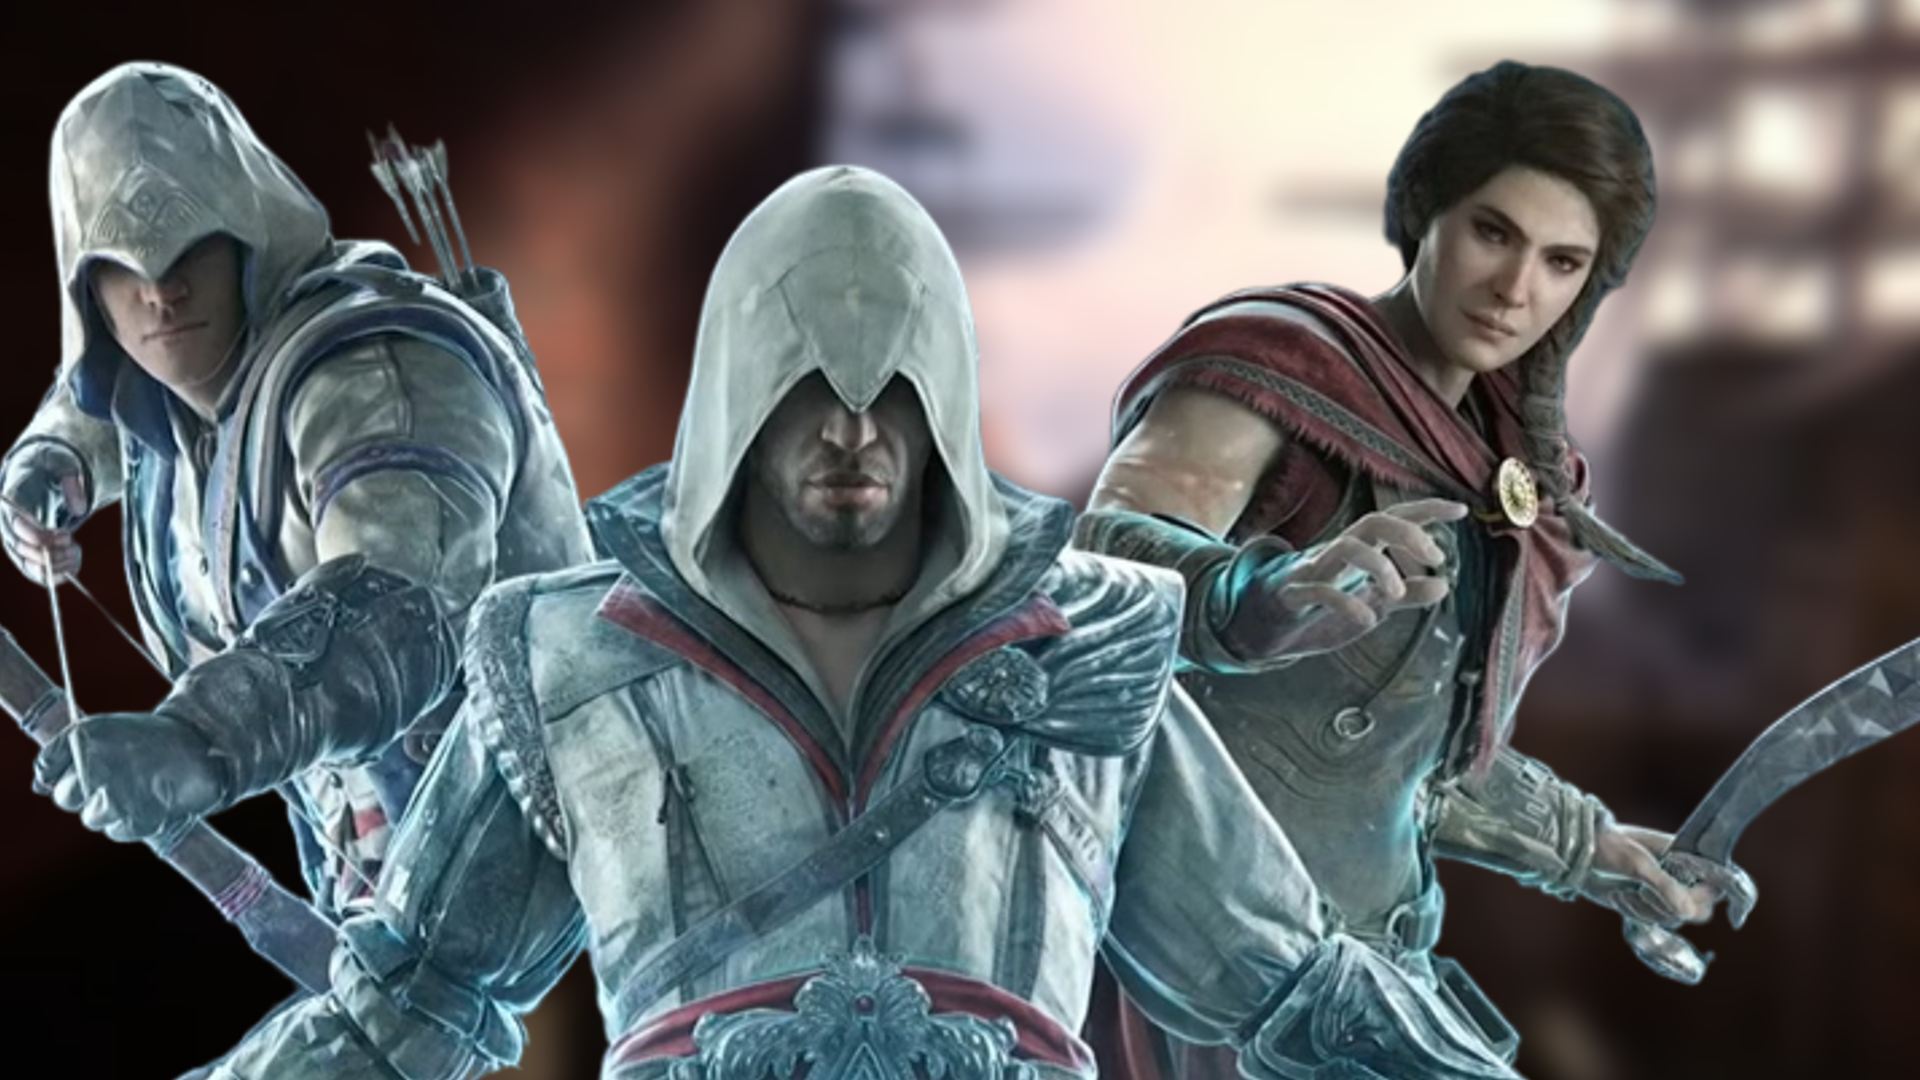 Assassin's Creed Infinity is built as a platform for future games